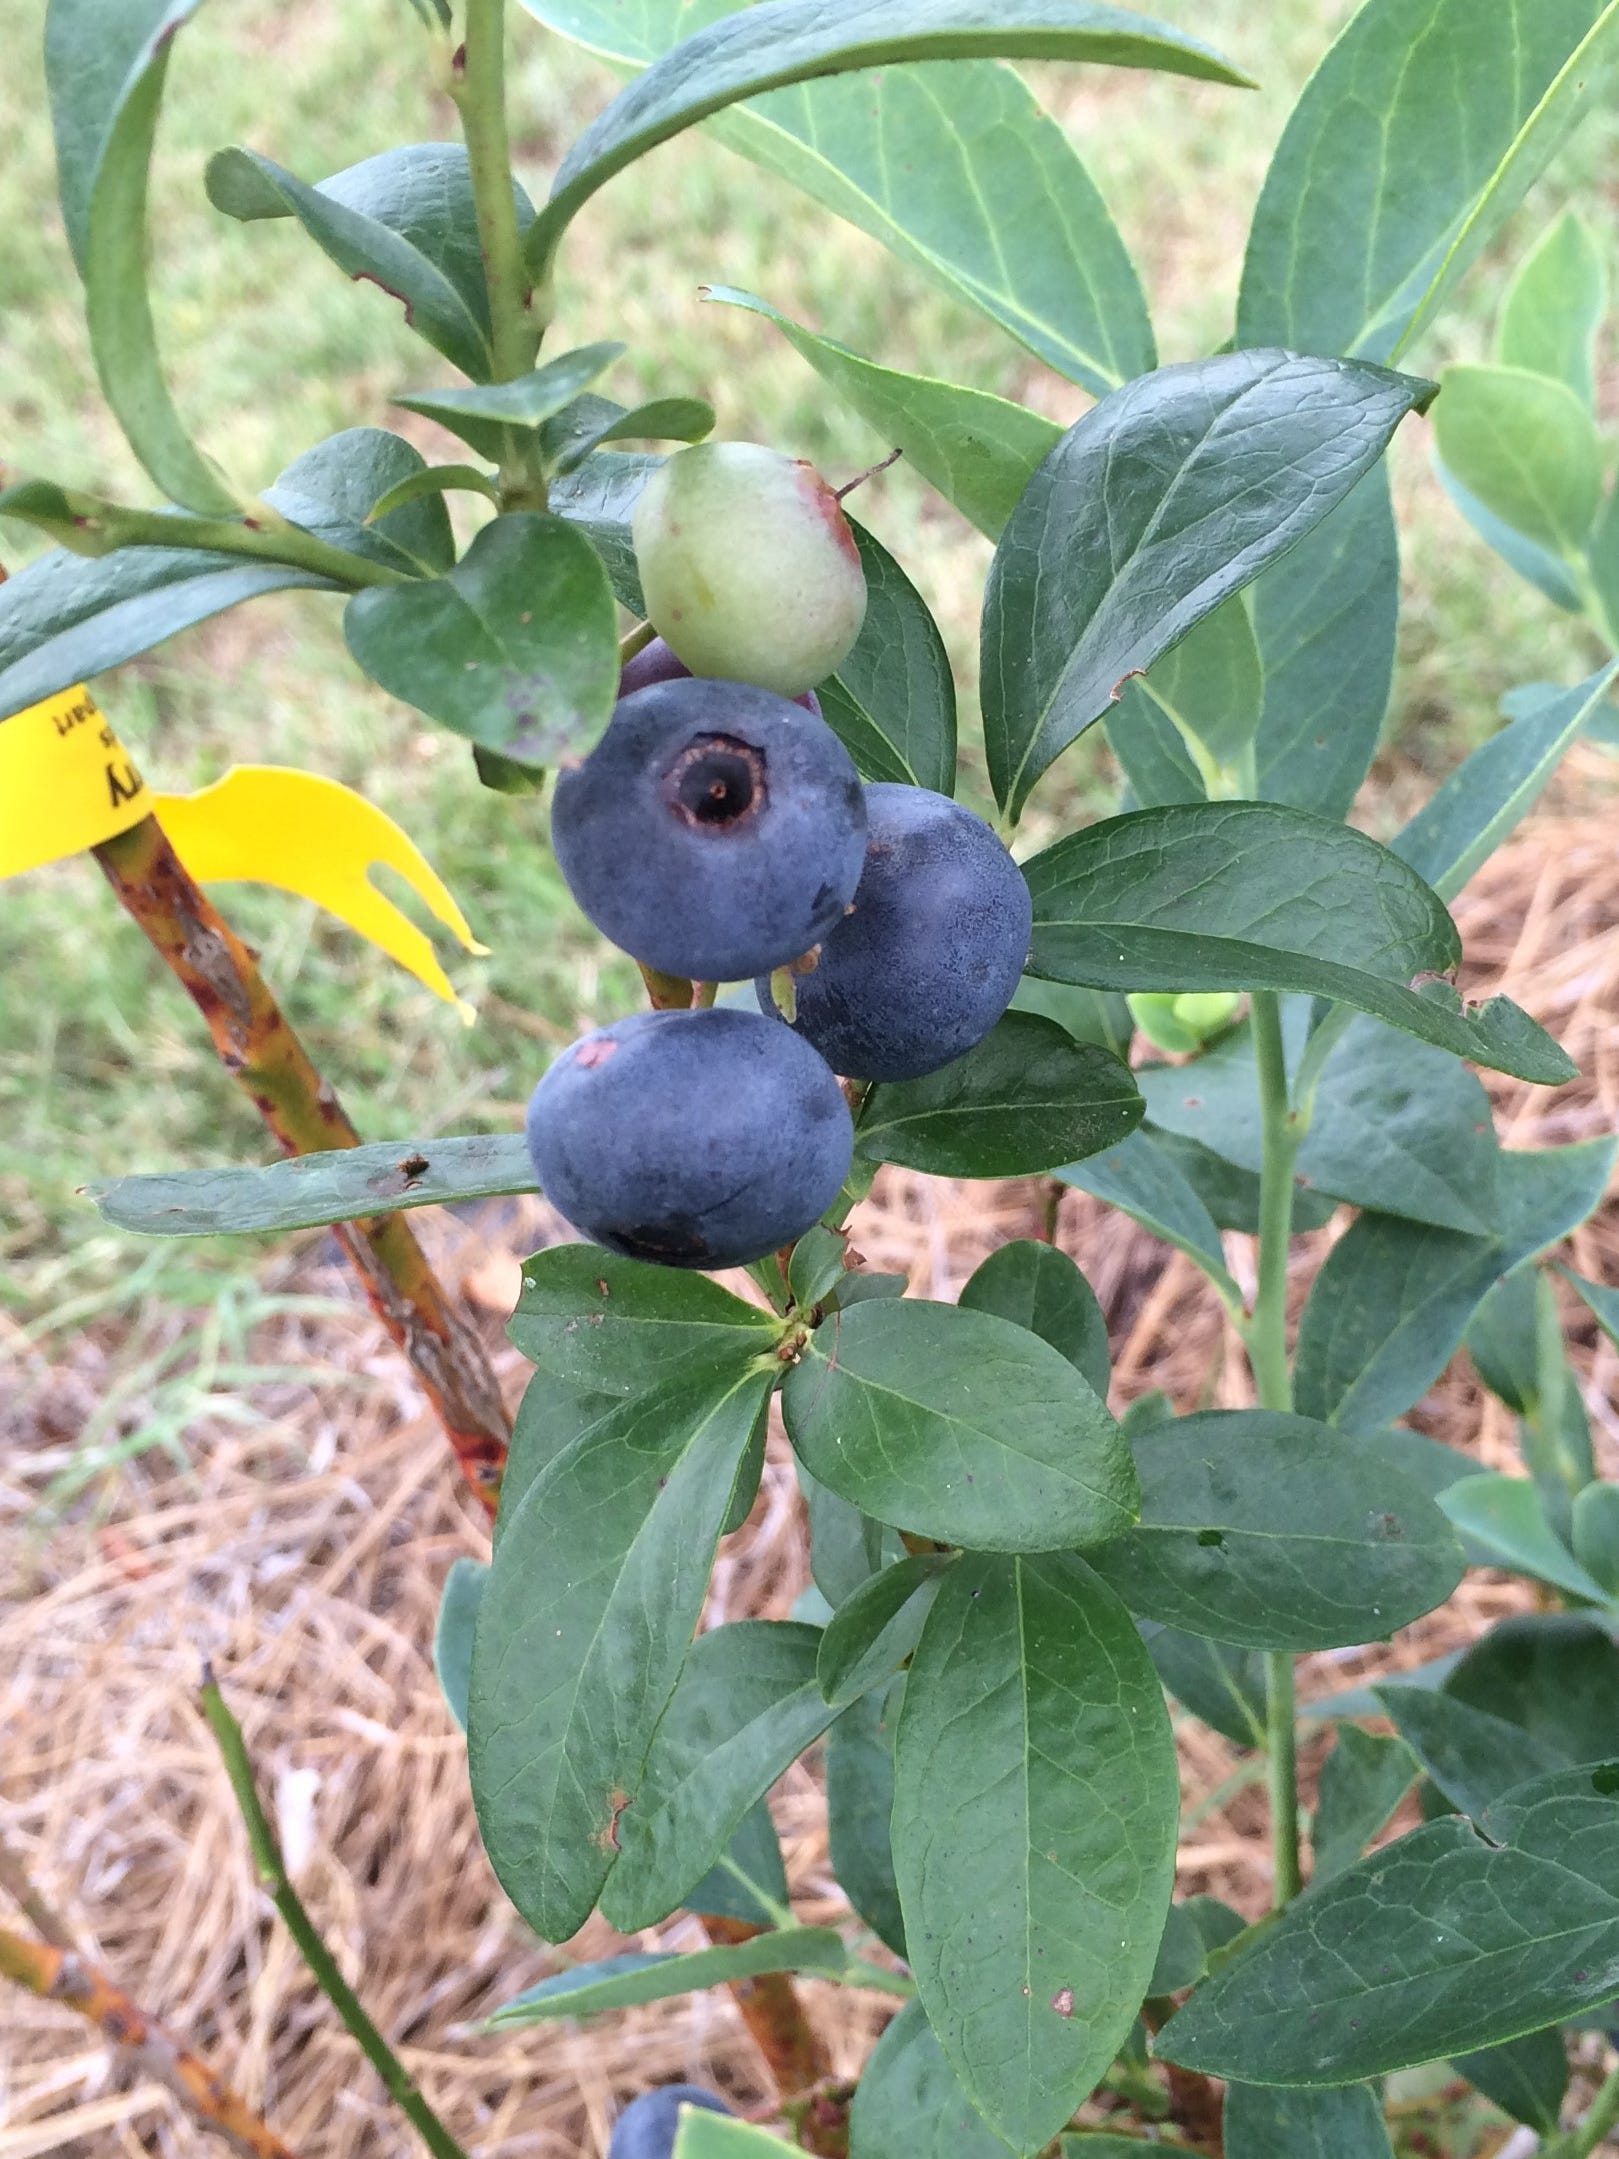 Thinking planting blueberries? the right variety for North Florida